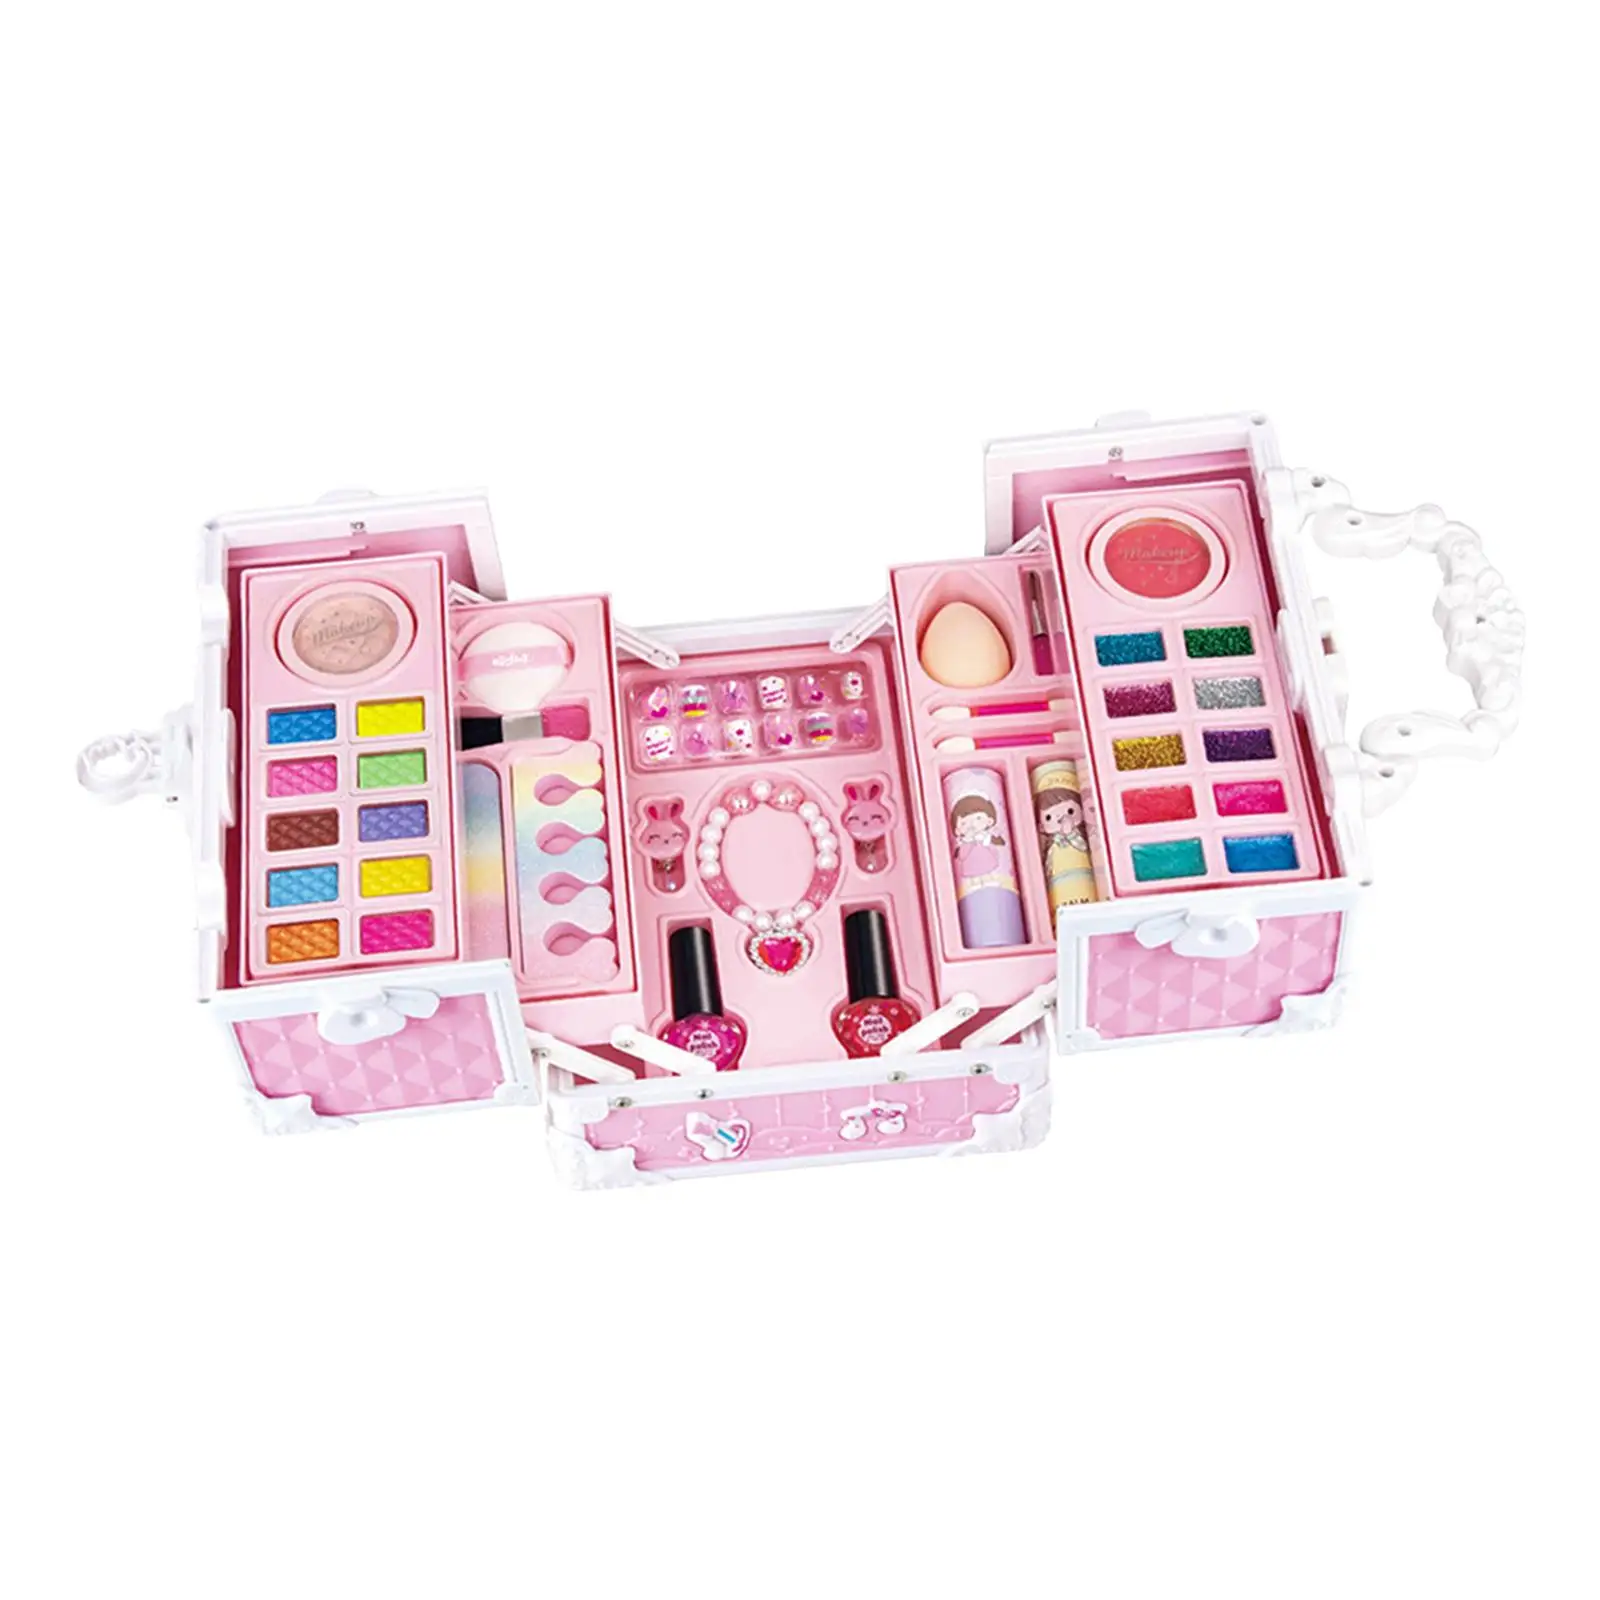 Kids Washable Makeup Girls Toys Pretend Makeup Accessories Makeup Set Toy for Children Kids Princess Dress up Birthday Toys Gift